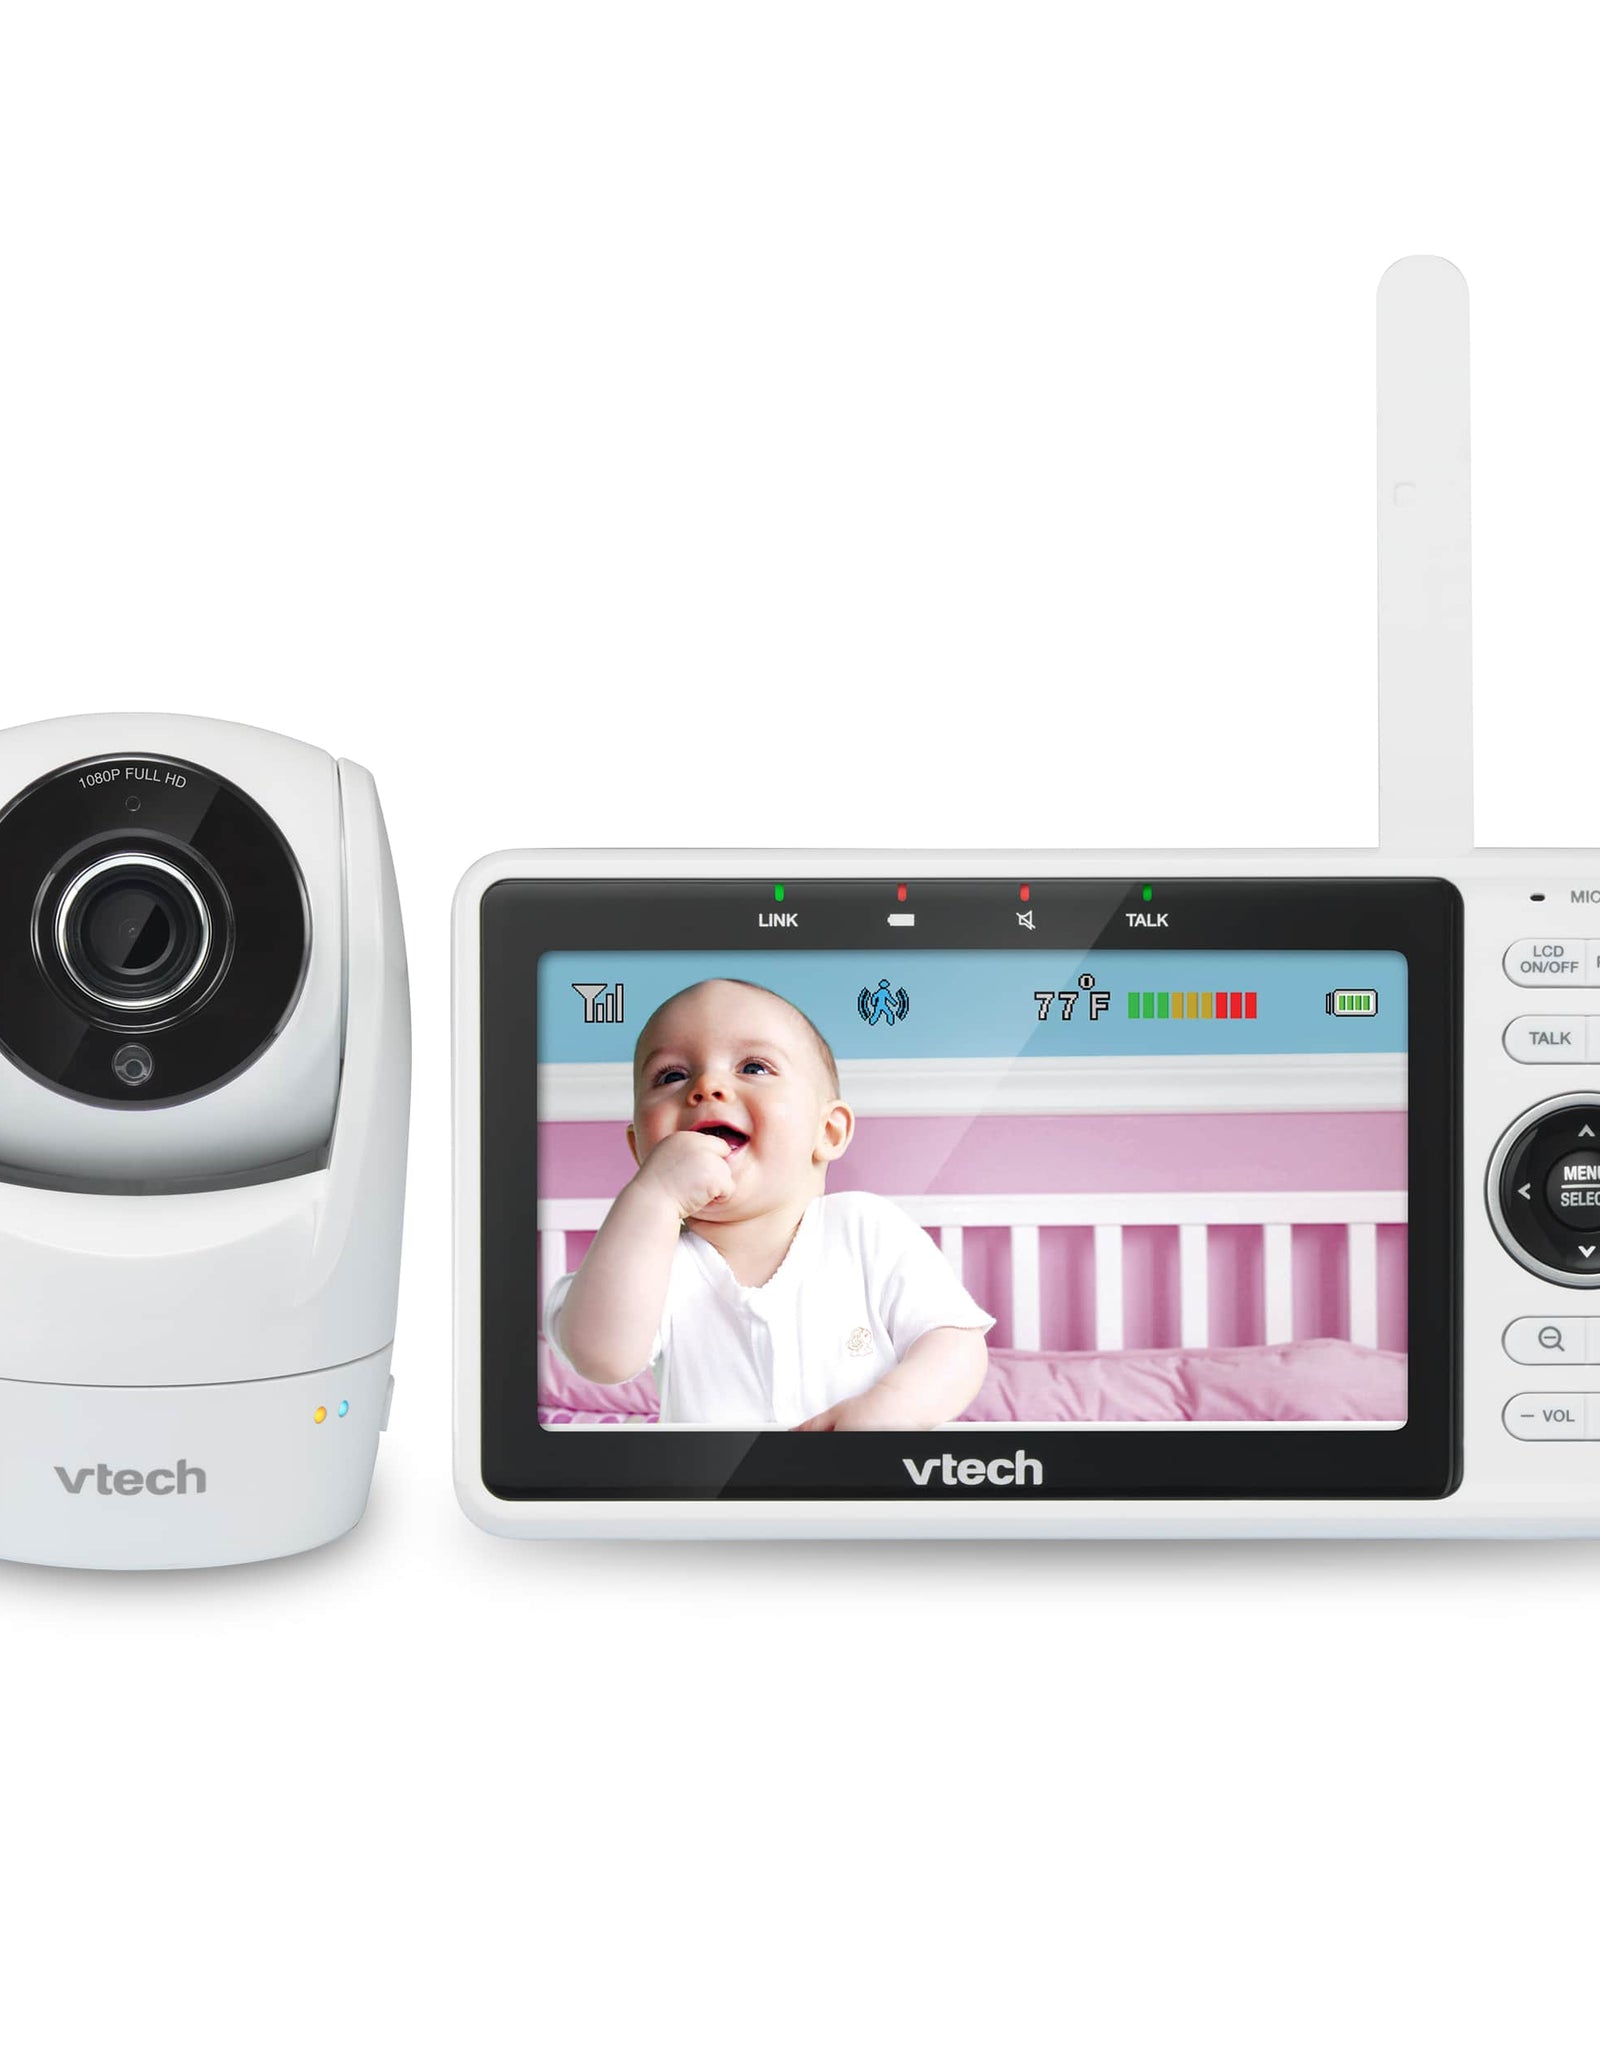 VTech Upgraded Smart WiFi Baby Monitor with 5 Inch display and 1080p HD 360 degree Pan & Tilt Camera